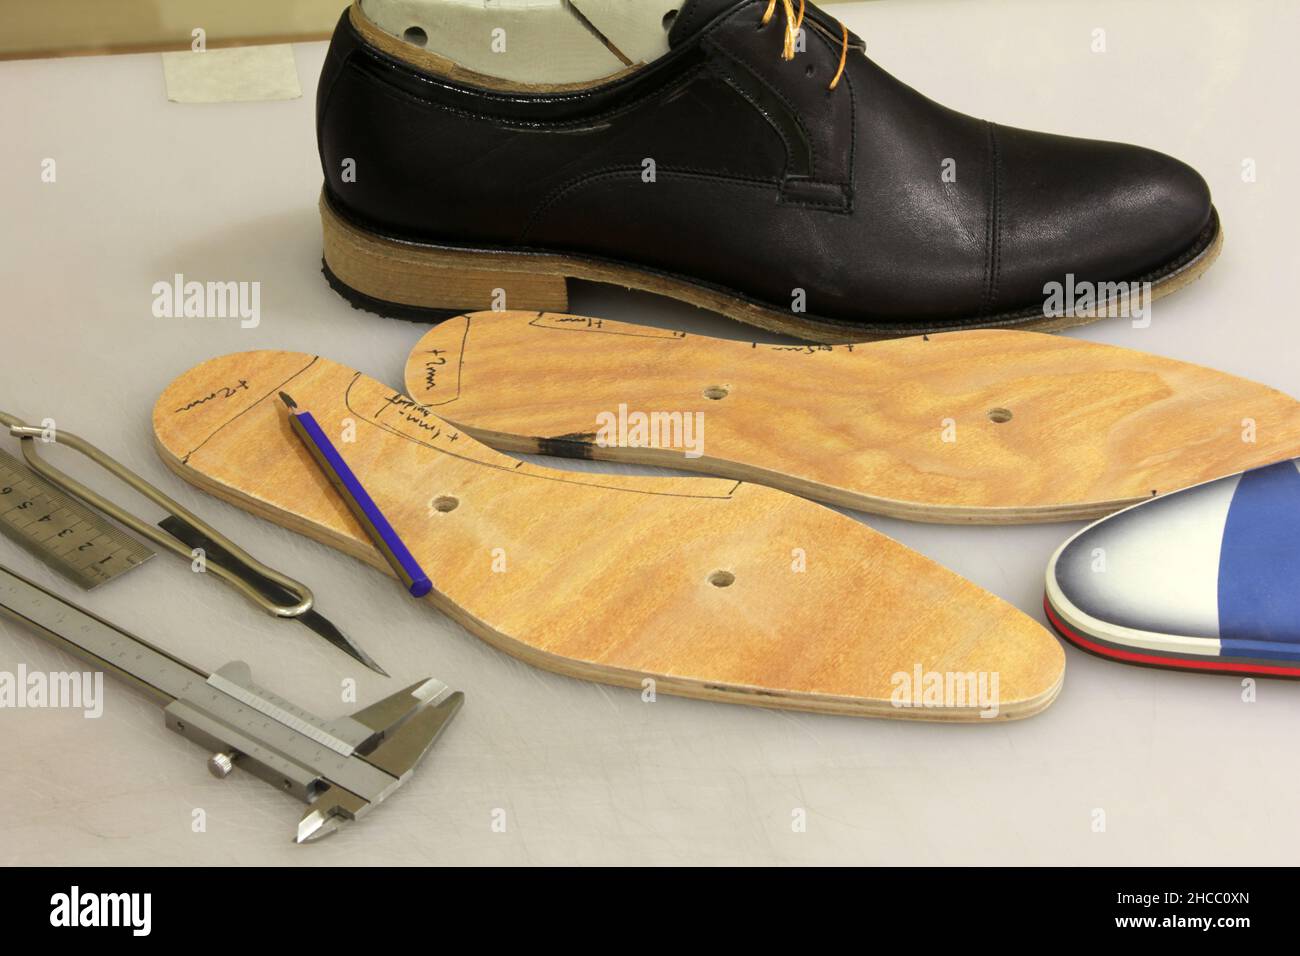 Manufacture of new shoes. Shoemaker's shop. Stock Photo